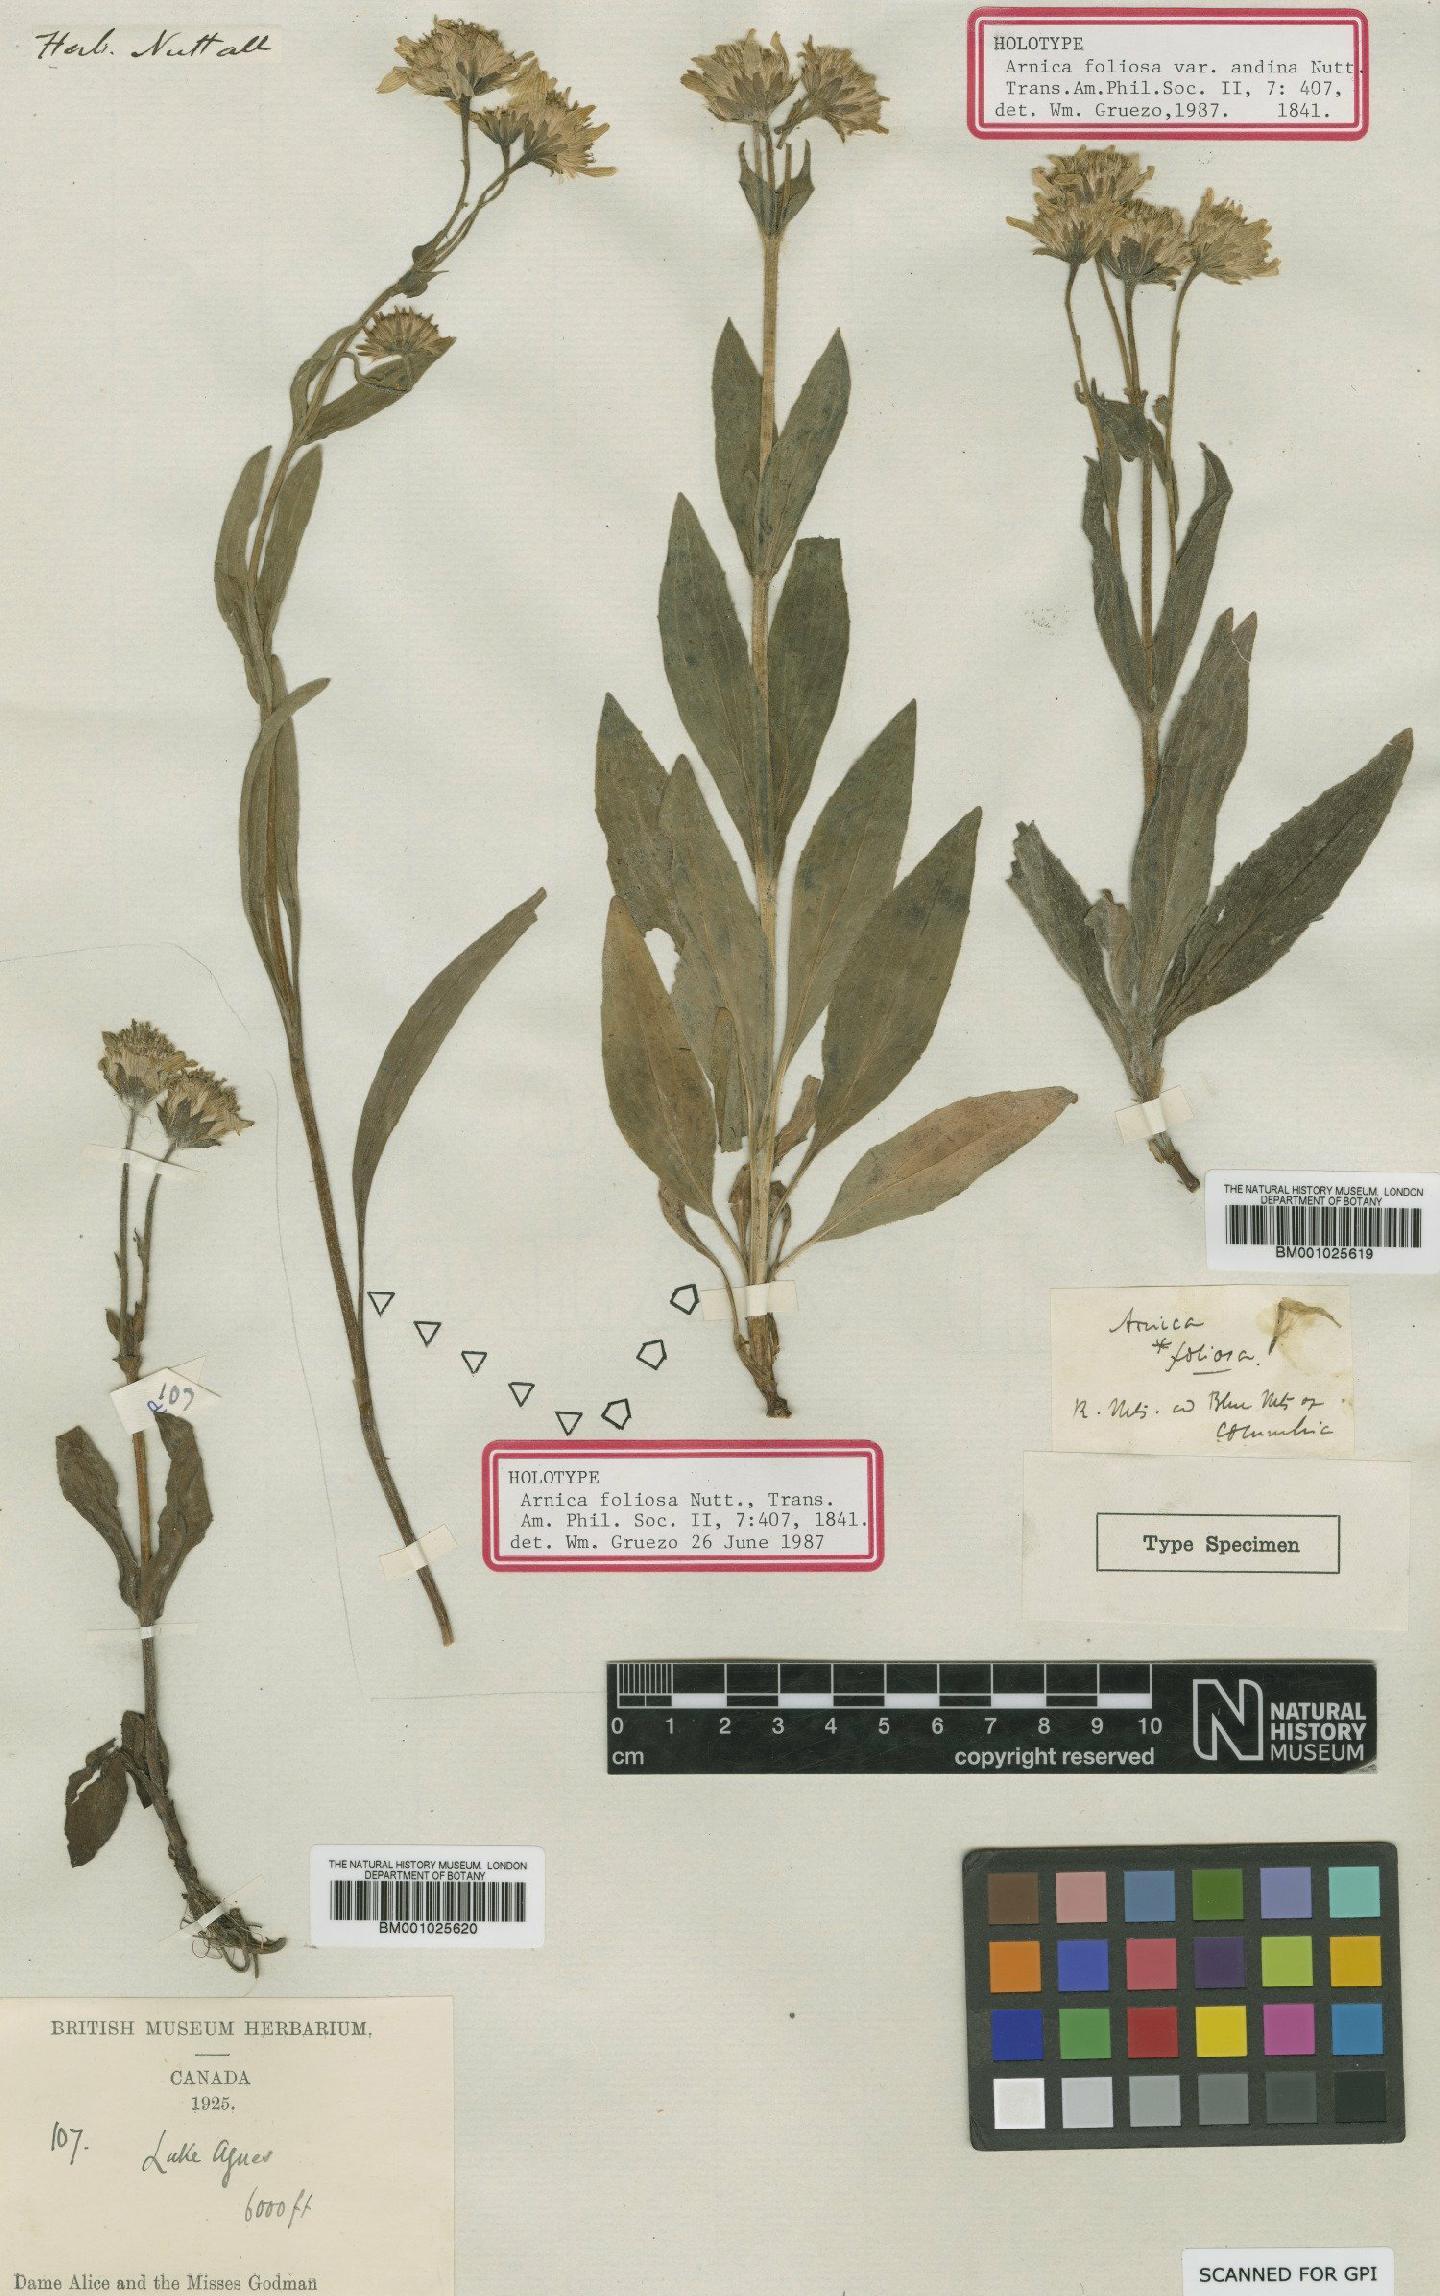 To NHMUK collection (Arnica chamissonis subsp. foliosa (Nutt.) Maguire; Holotype; NHMUK:ecatalogue:1185263)